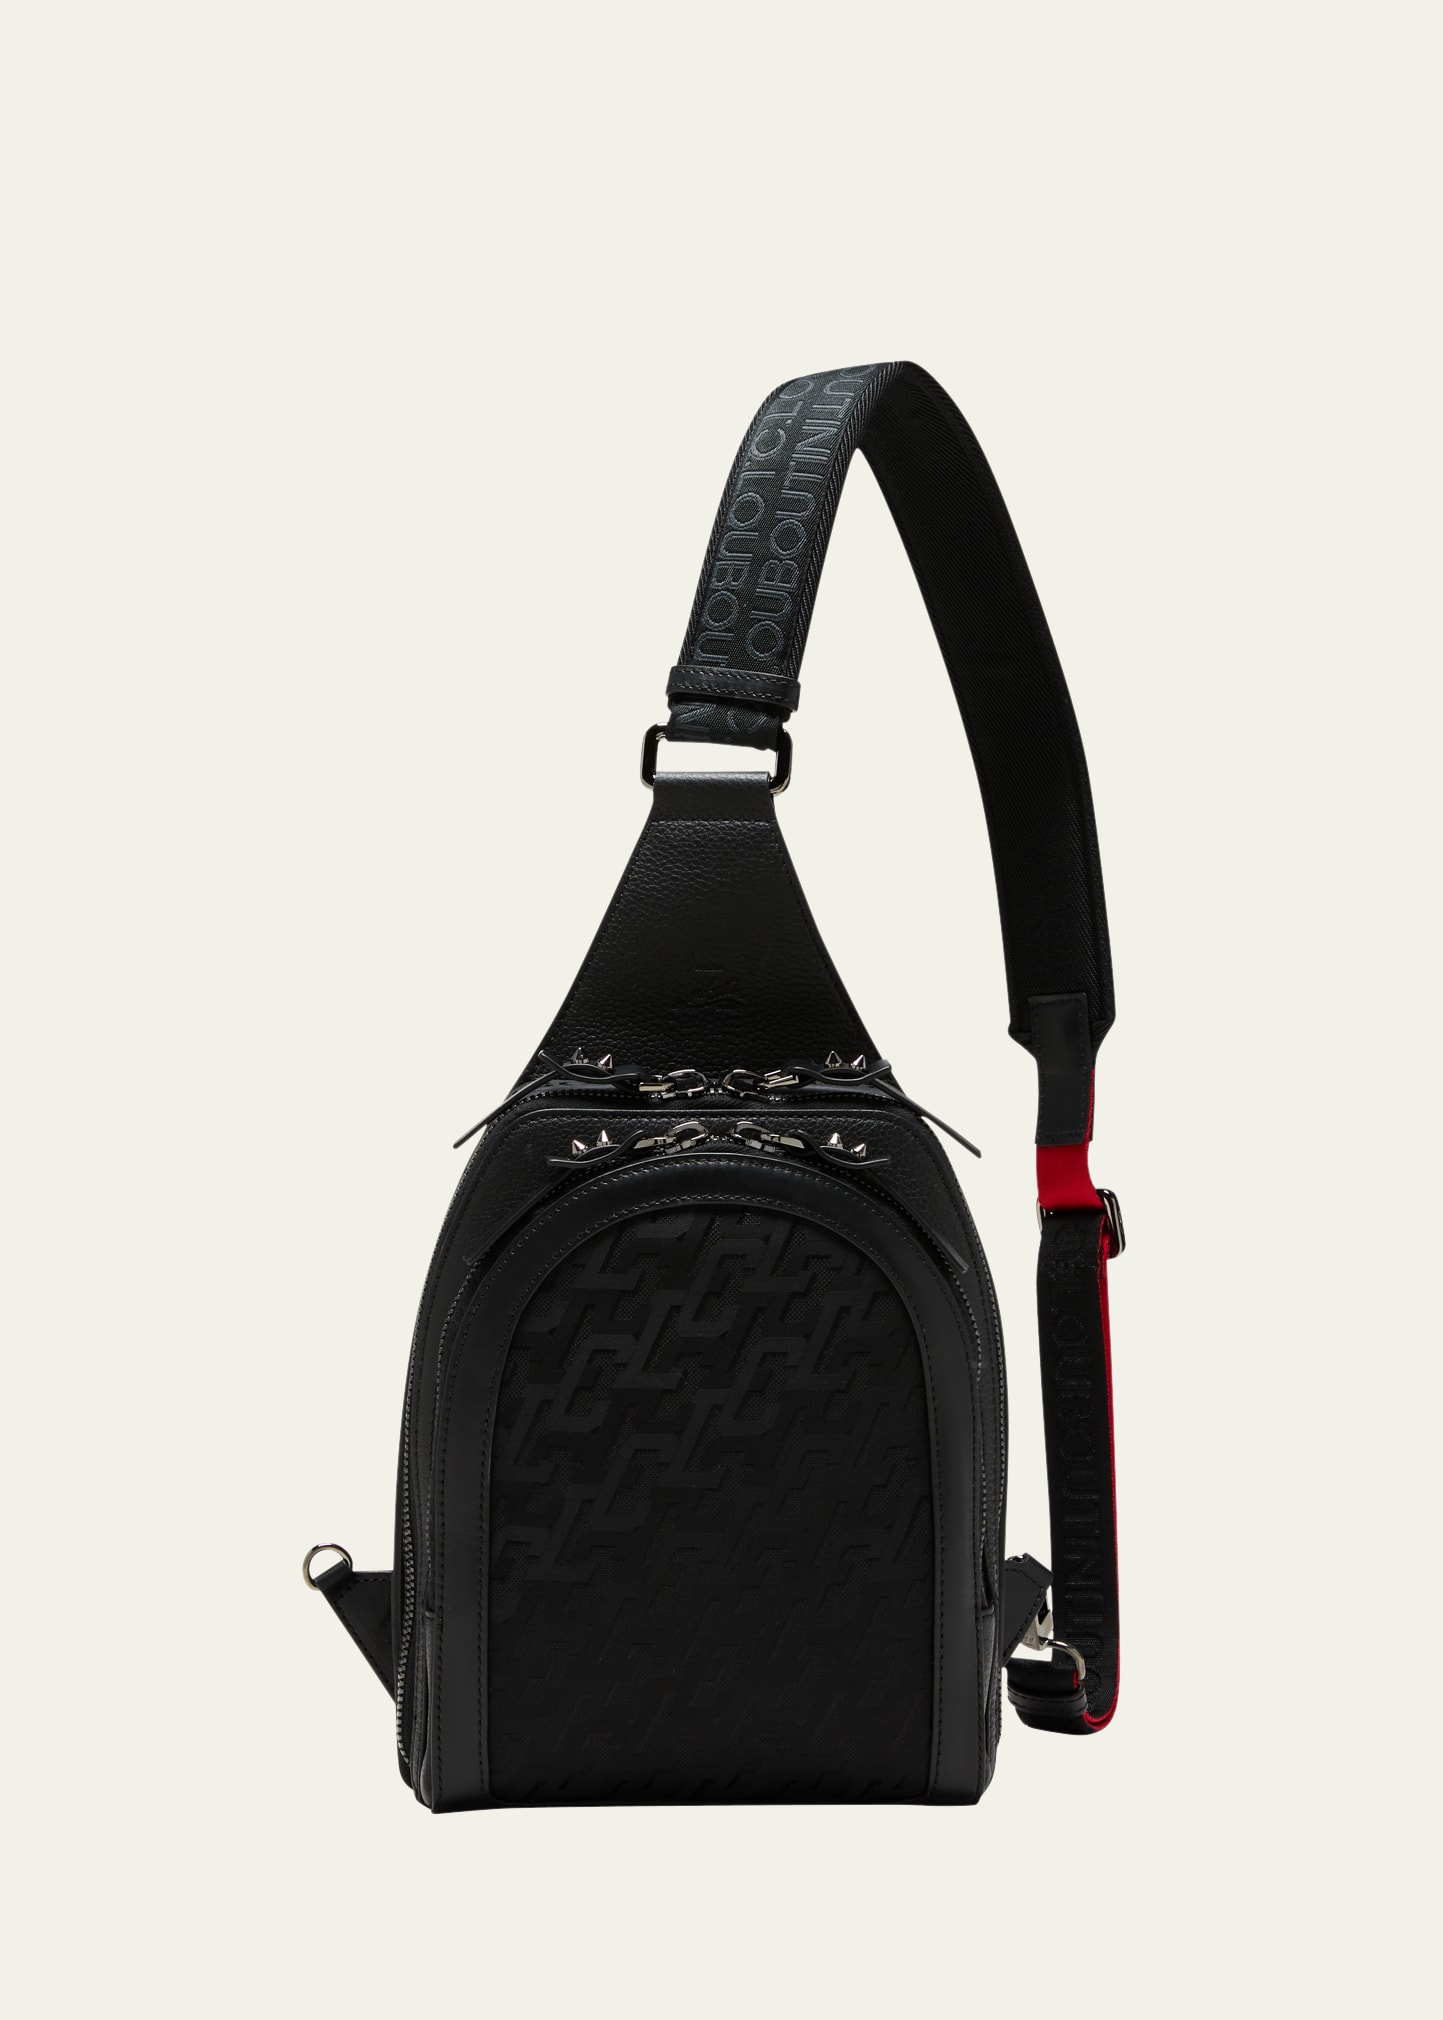 Christian Louboutin Loubifunk Spiked Leather Backpack in Black for Men